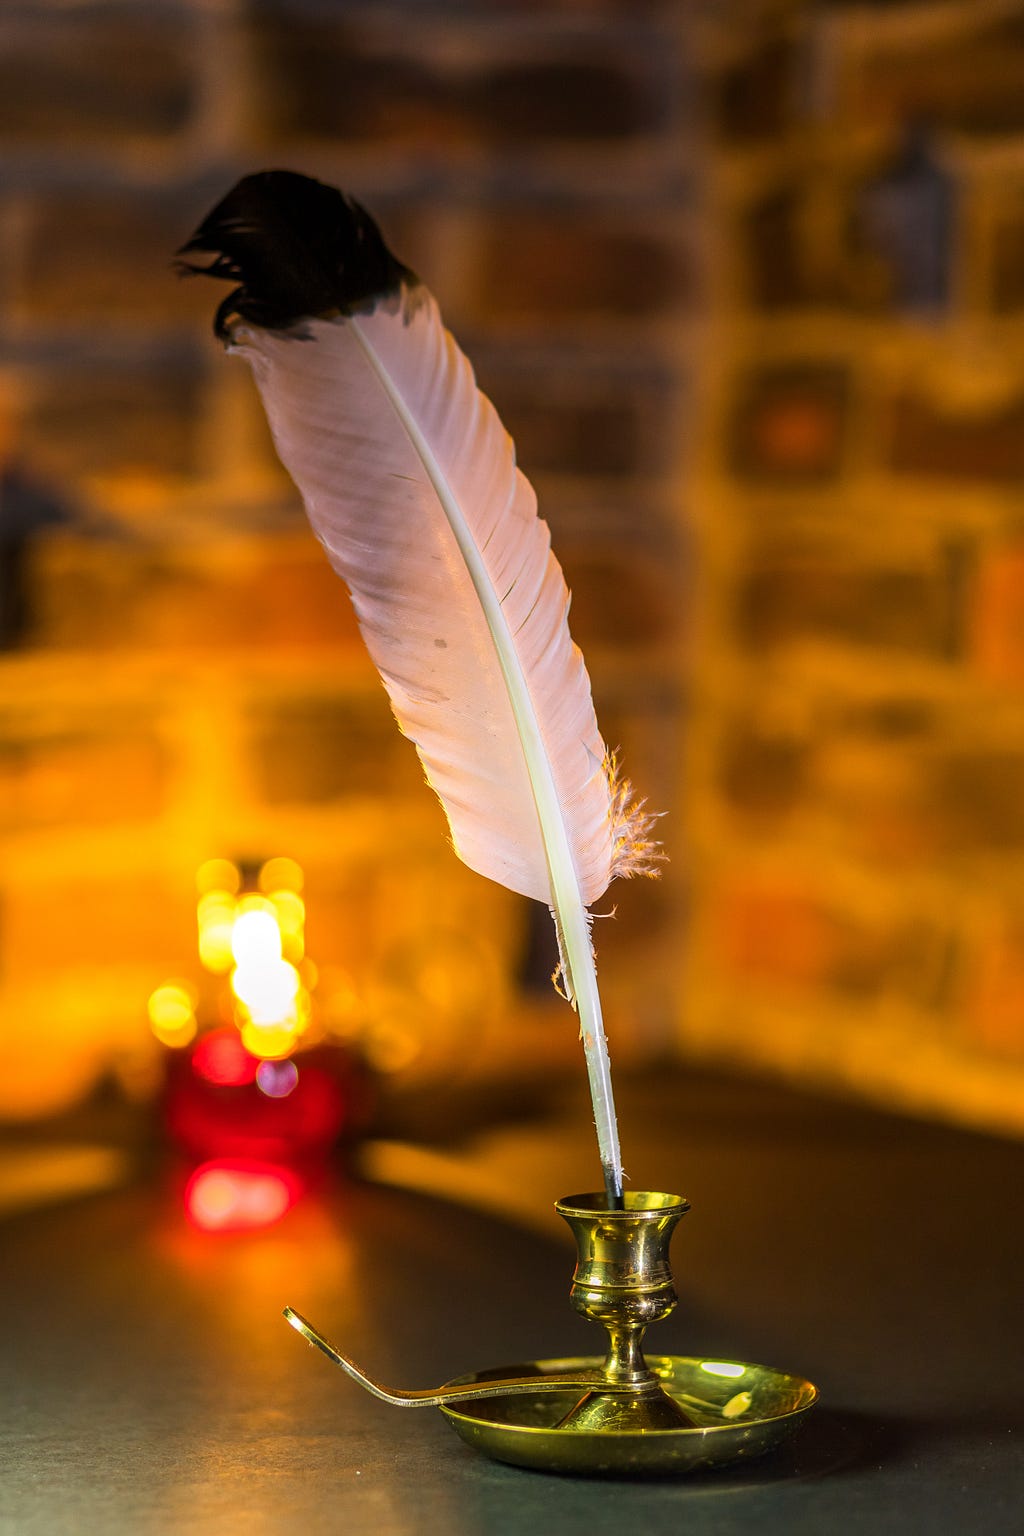 A quill pen in front of a warmly lit but out of focus background